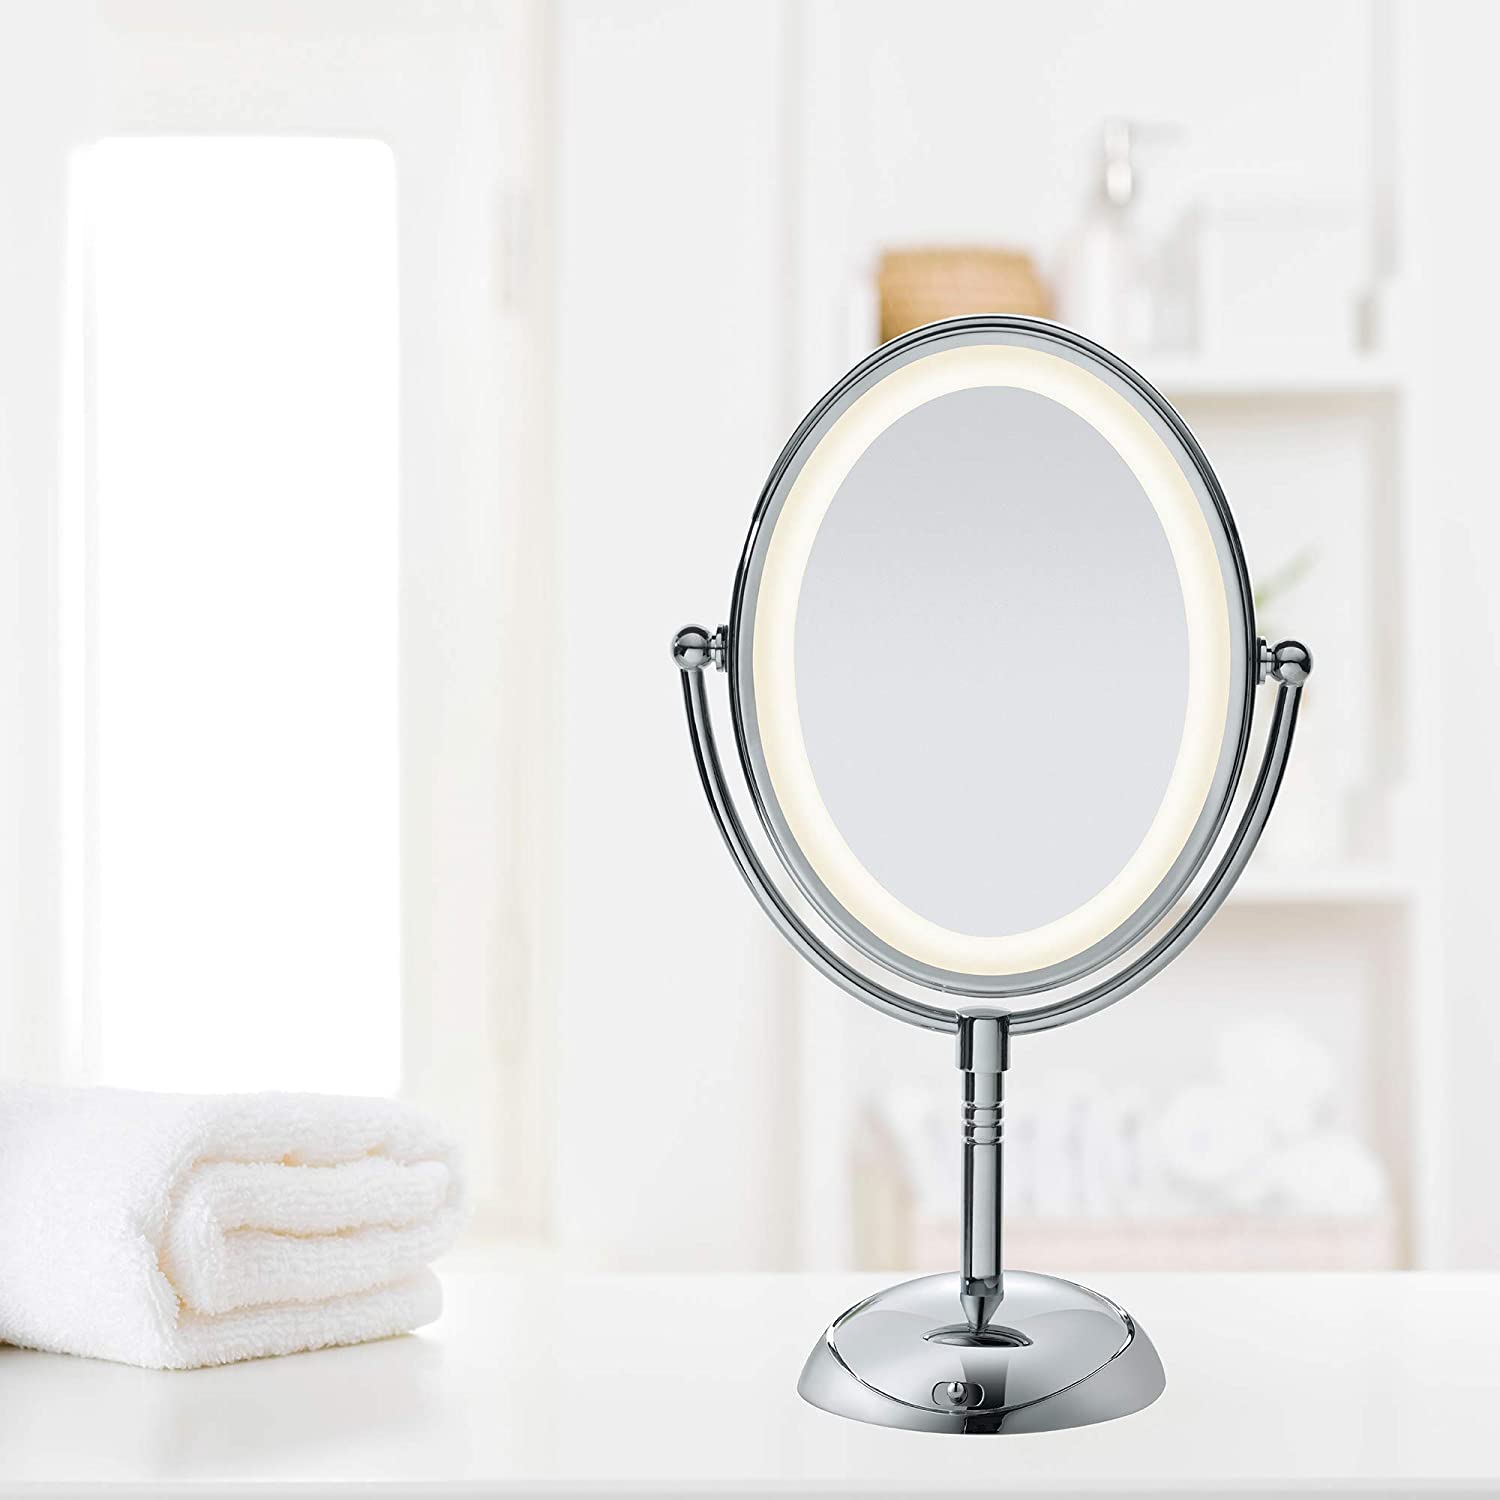 Conair Double-Sided Lighted Vanity Mirror with LED Lights, 1x/7x Magnification, Satin Nickel, BE157 - image 5 of 8